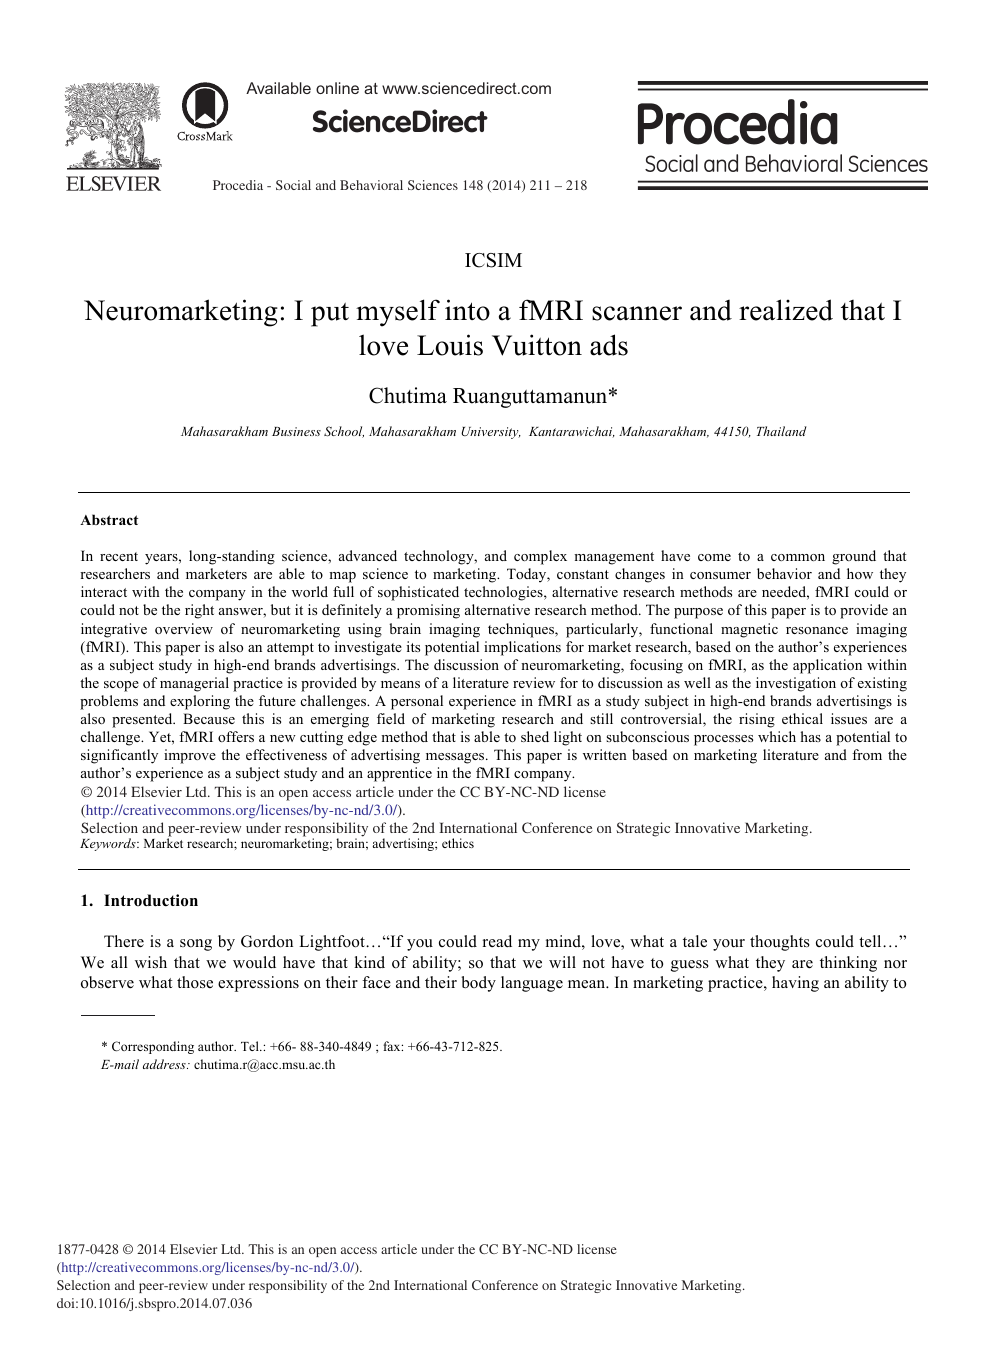 Neuromarketing: I Put Myself into a fMRI Scanner and Realized that I love Louis  Vuitton Ads – topic of research paper in Economics and business. Download  scholarly article PDF and read for